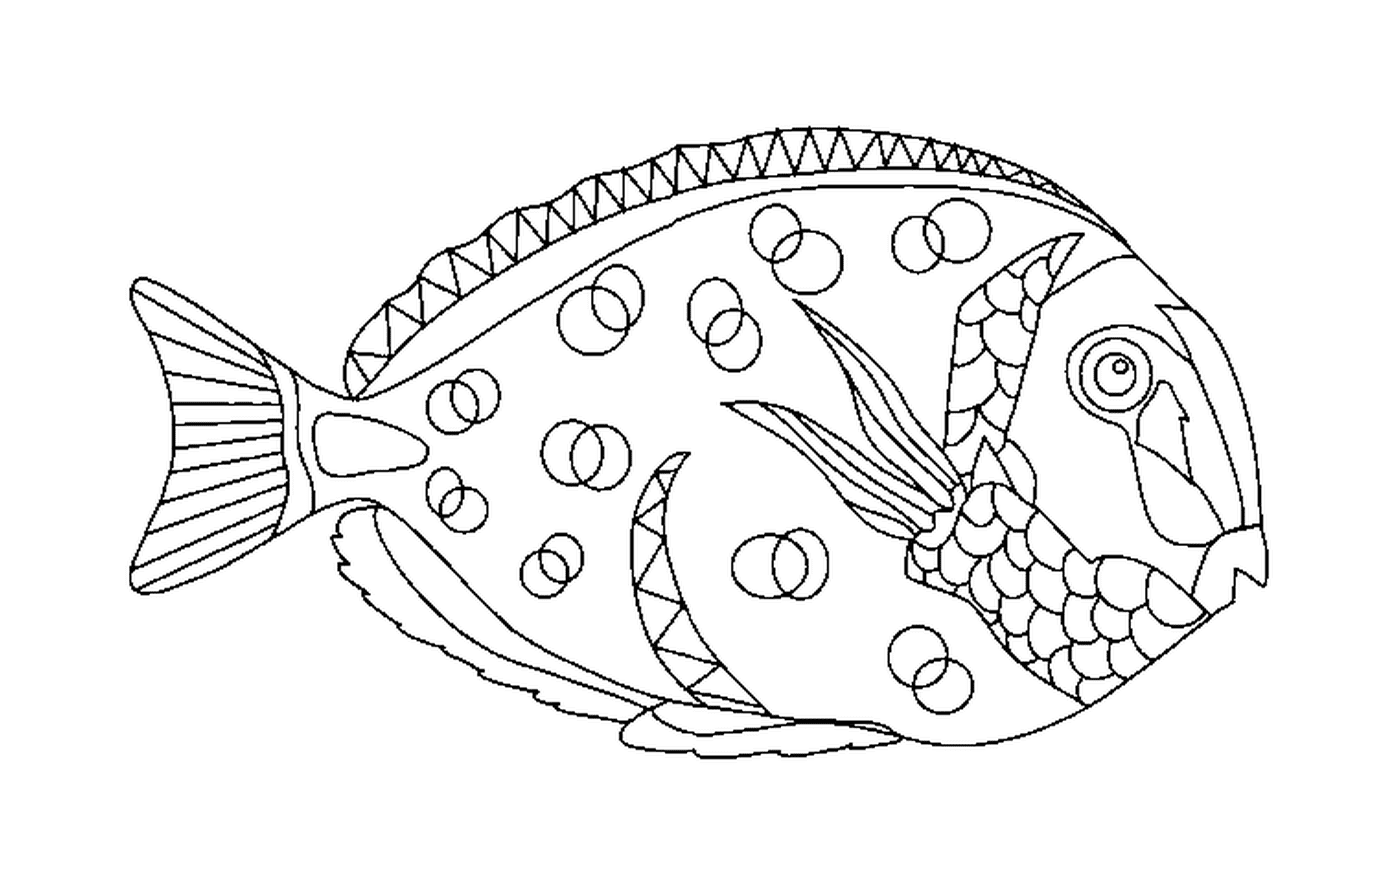  April fish with circles and triangles 